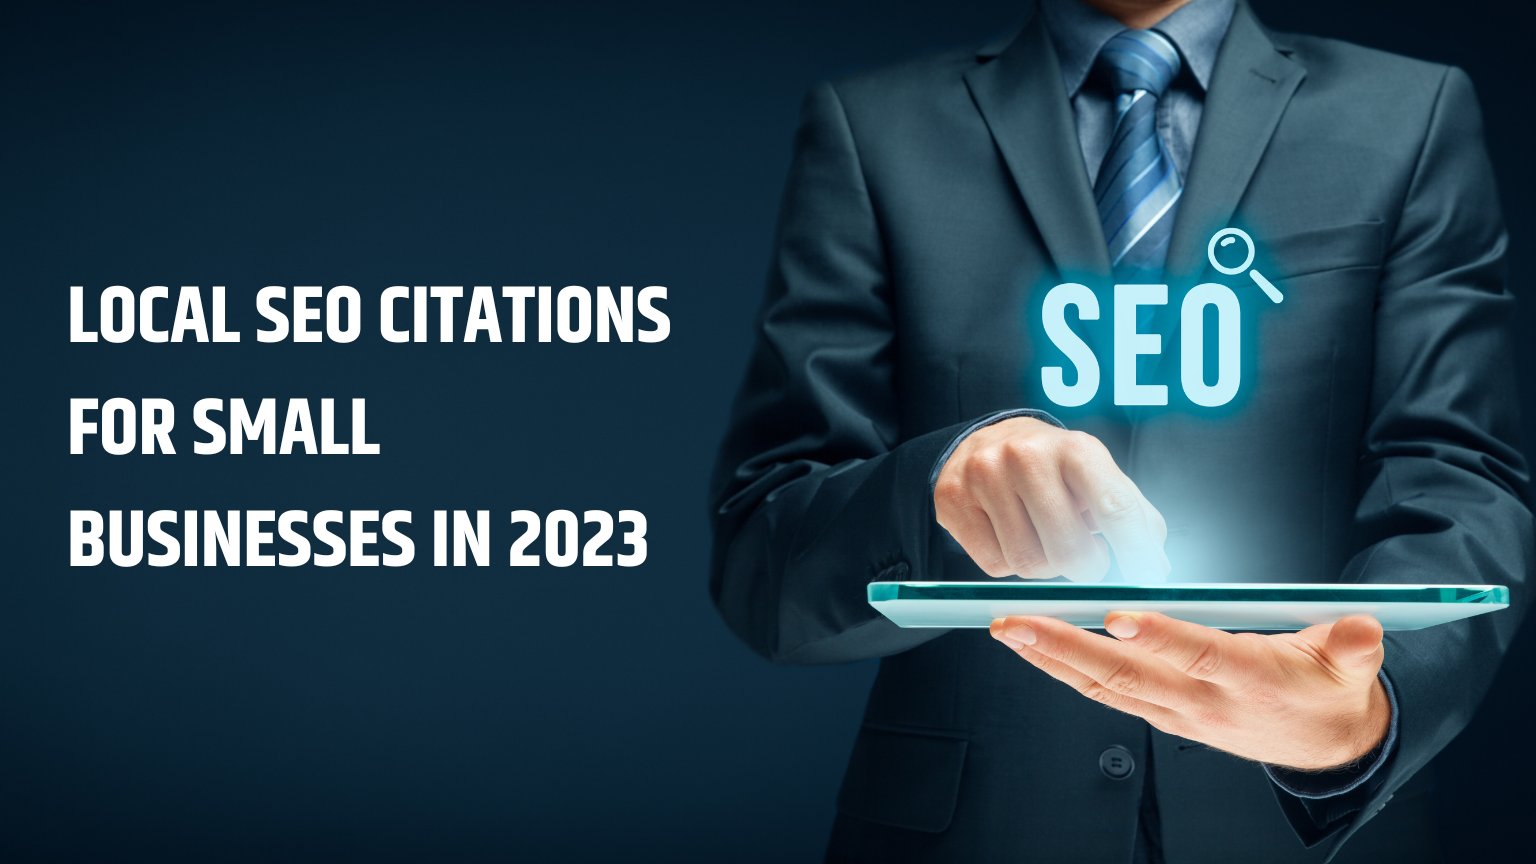 Local SEO Citations for Small Businesses in 2023